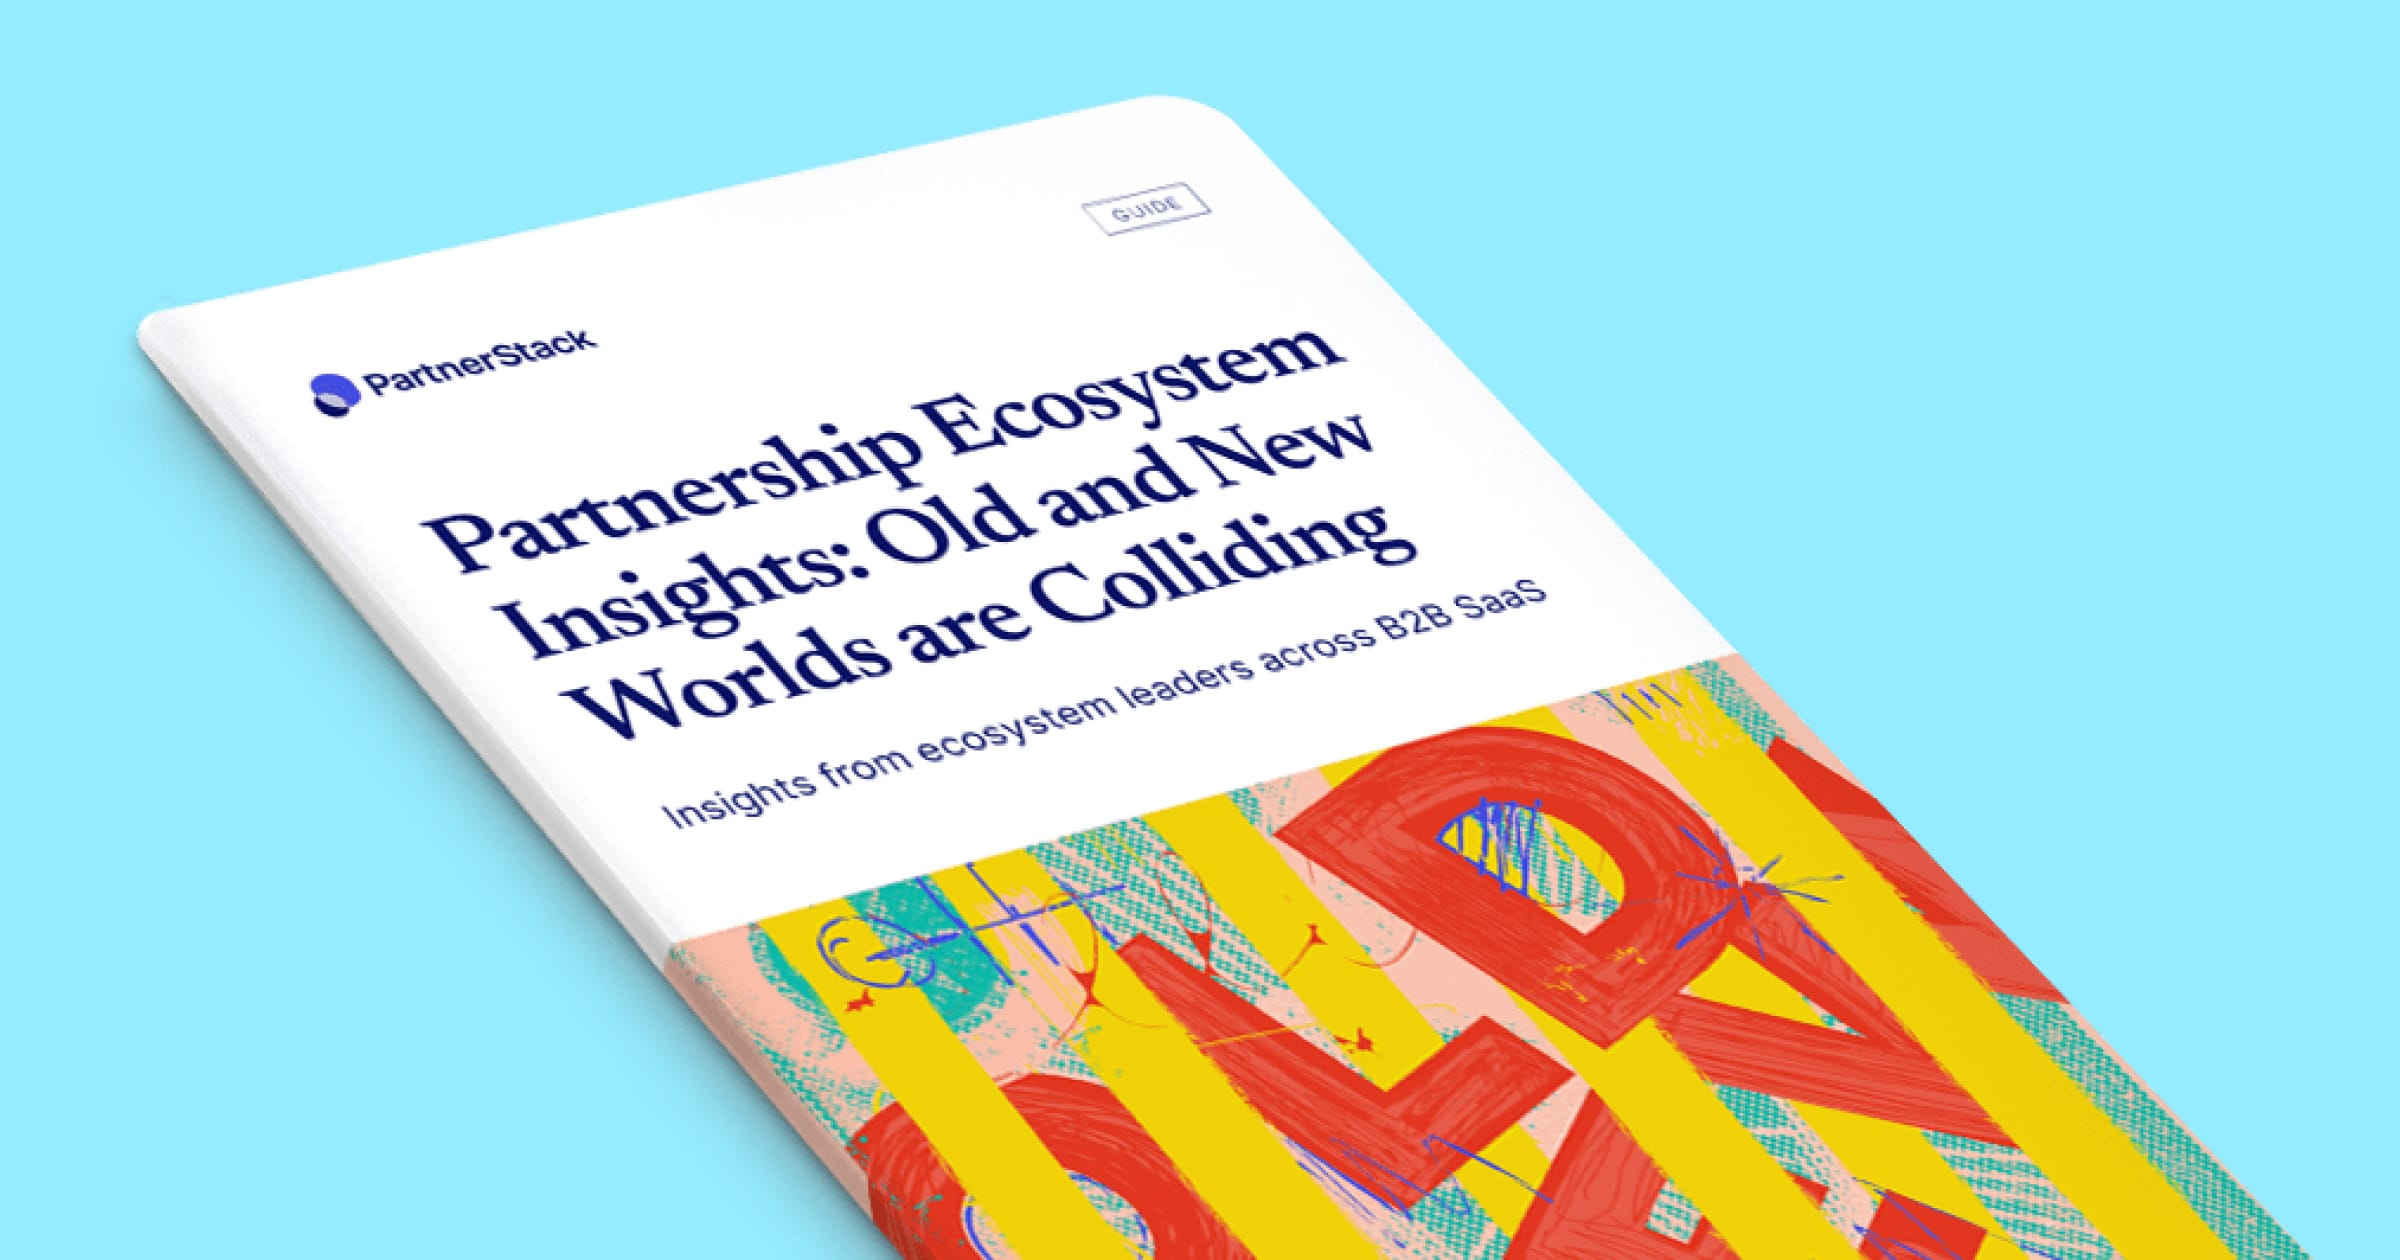 Partnerships Ecosystem Insights: Old and New Worlds are Colliding cover